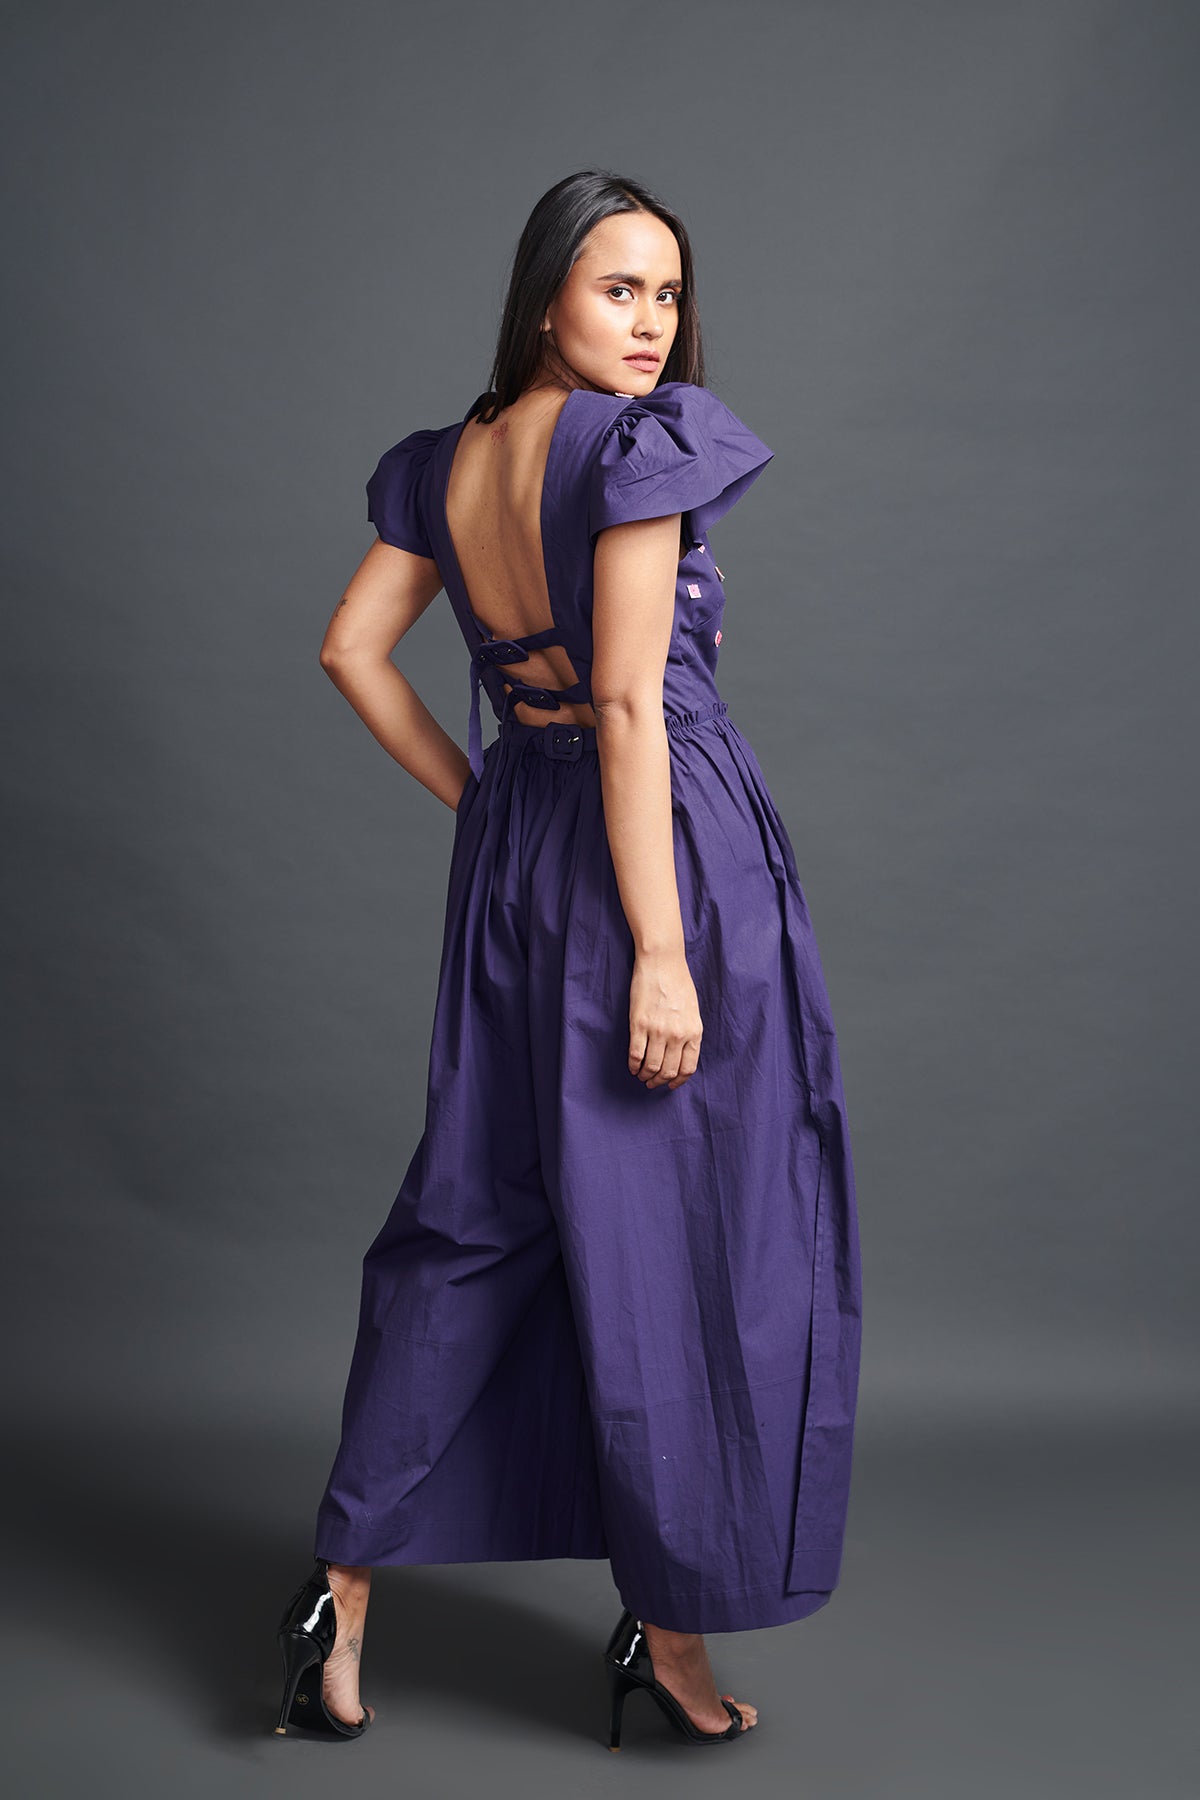 Image of PURPLE BACKLESS JUMPSUIT IN COTTON BASE WITH CUTWORK EMBROIDERY. From savoirfashions.com